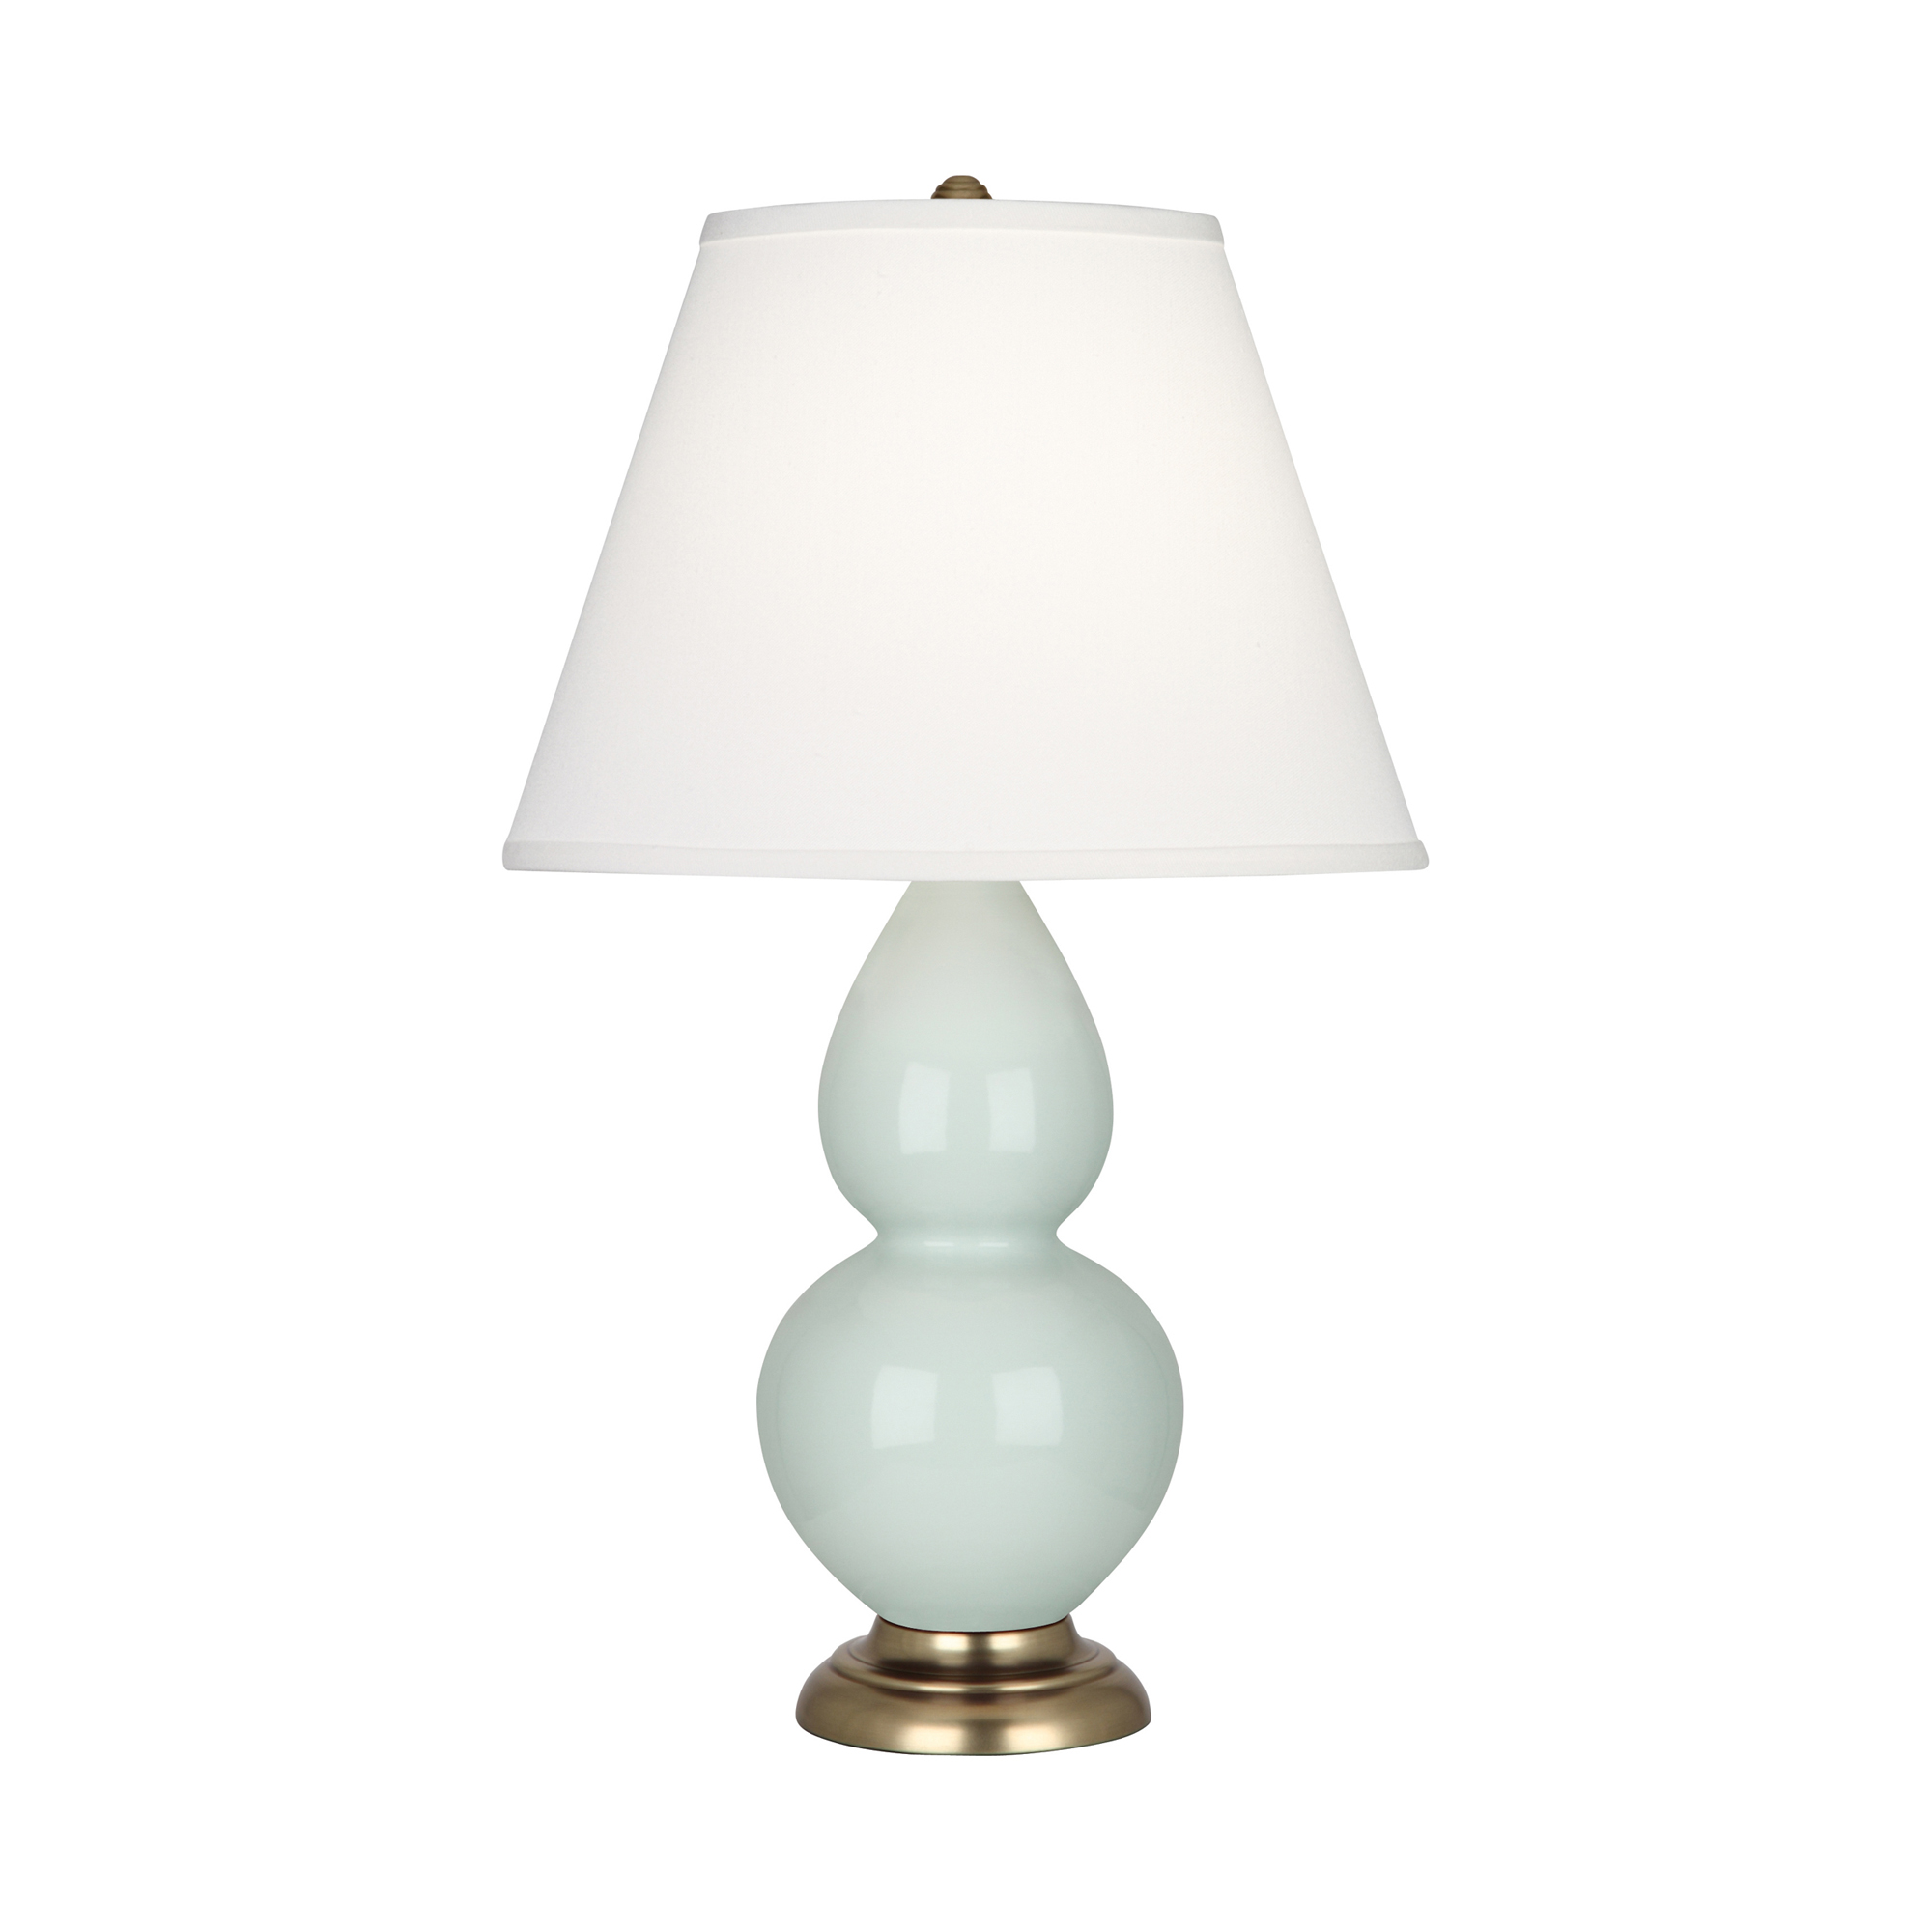 Small Double Gourd Accent Lamp Style #1786X